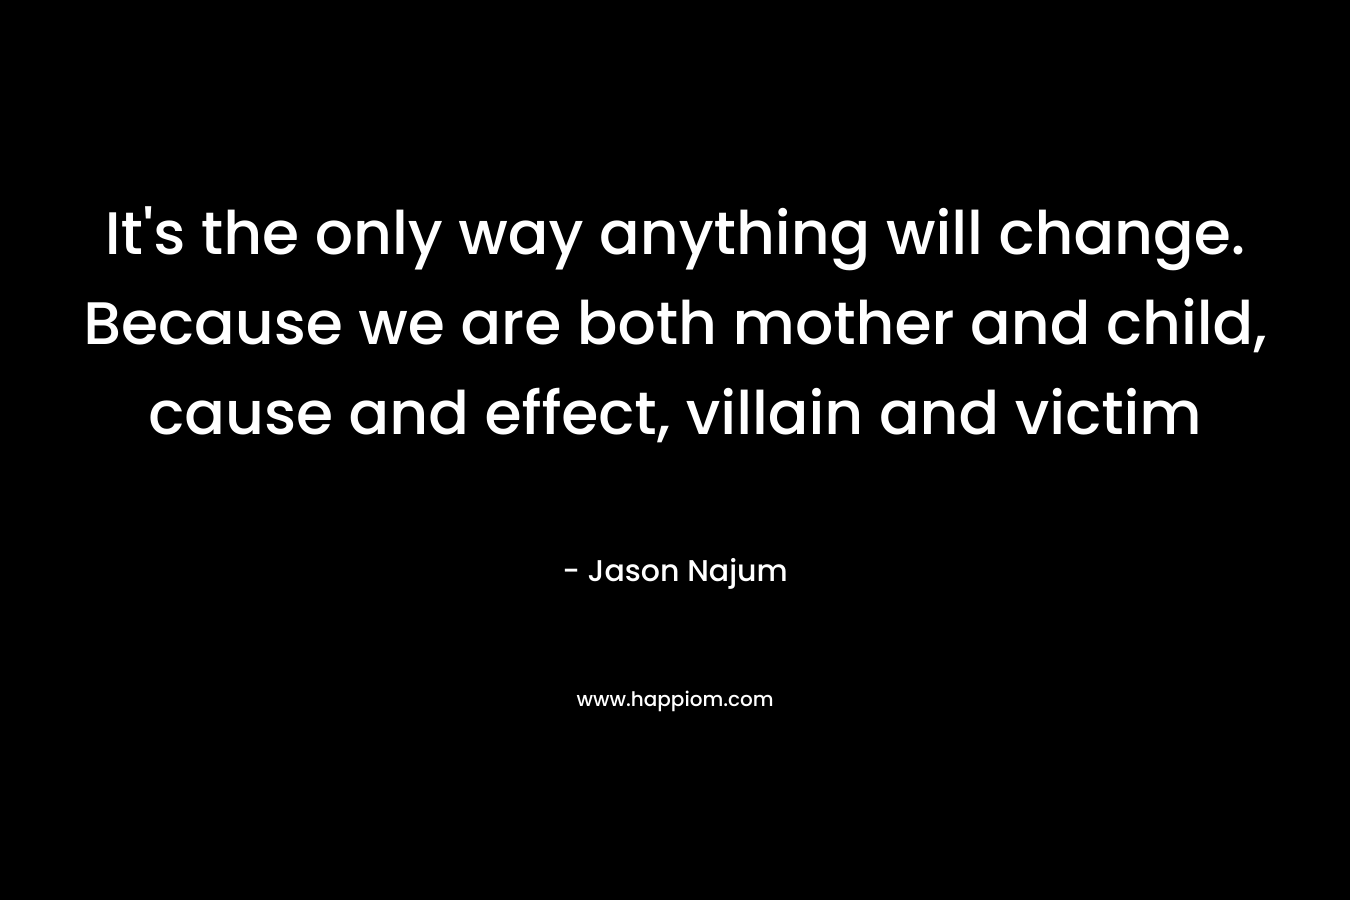 It's the only way anything will change. Because we are both mother and child, cause and effect, villain and victim